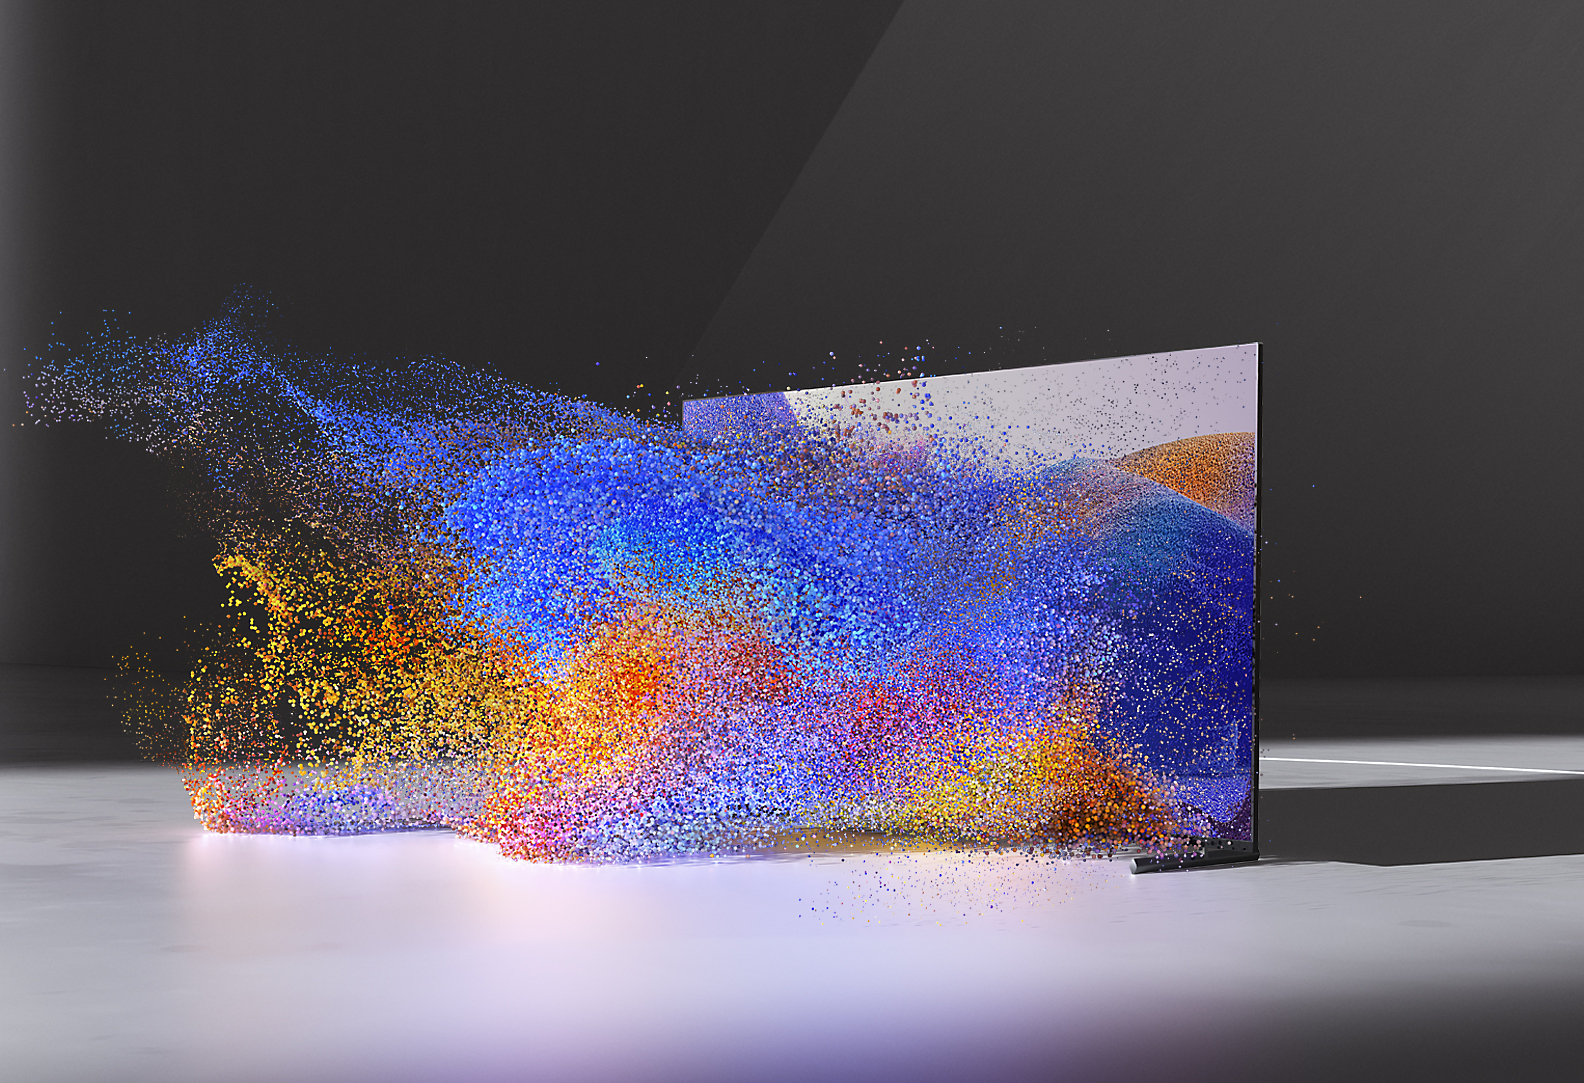 BRAVIA XR TV displaying an abstract, colourful image that appears to be cascading out of the screen